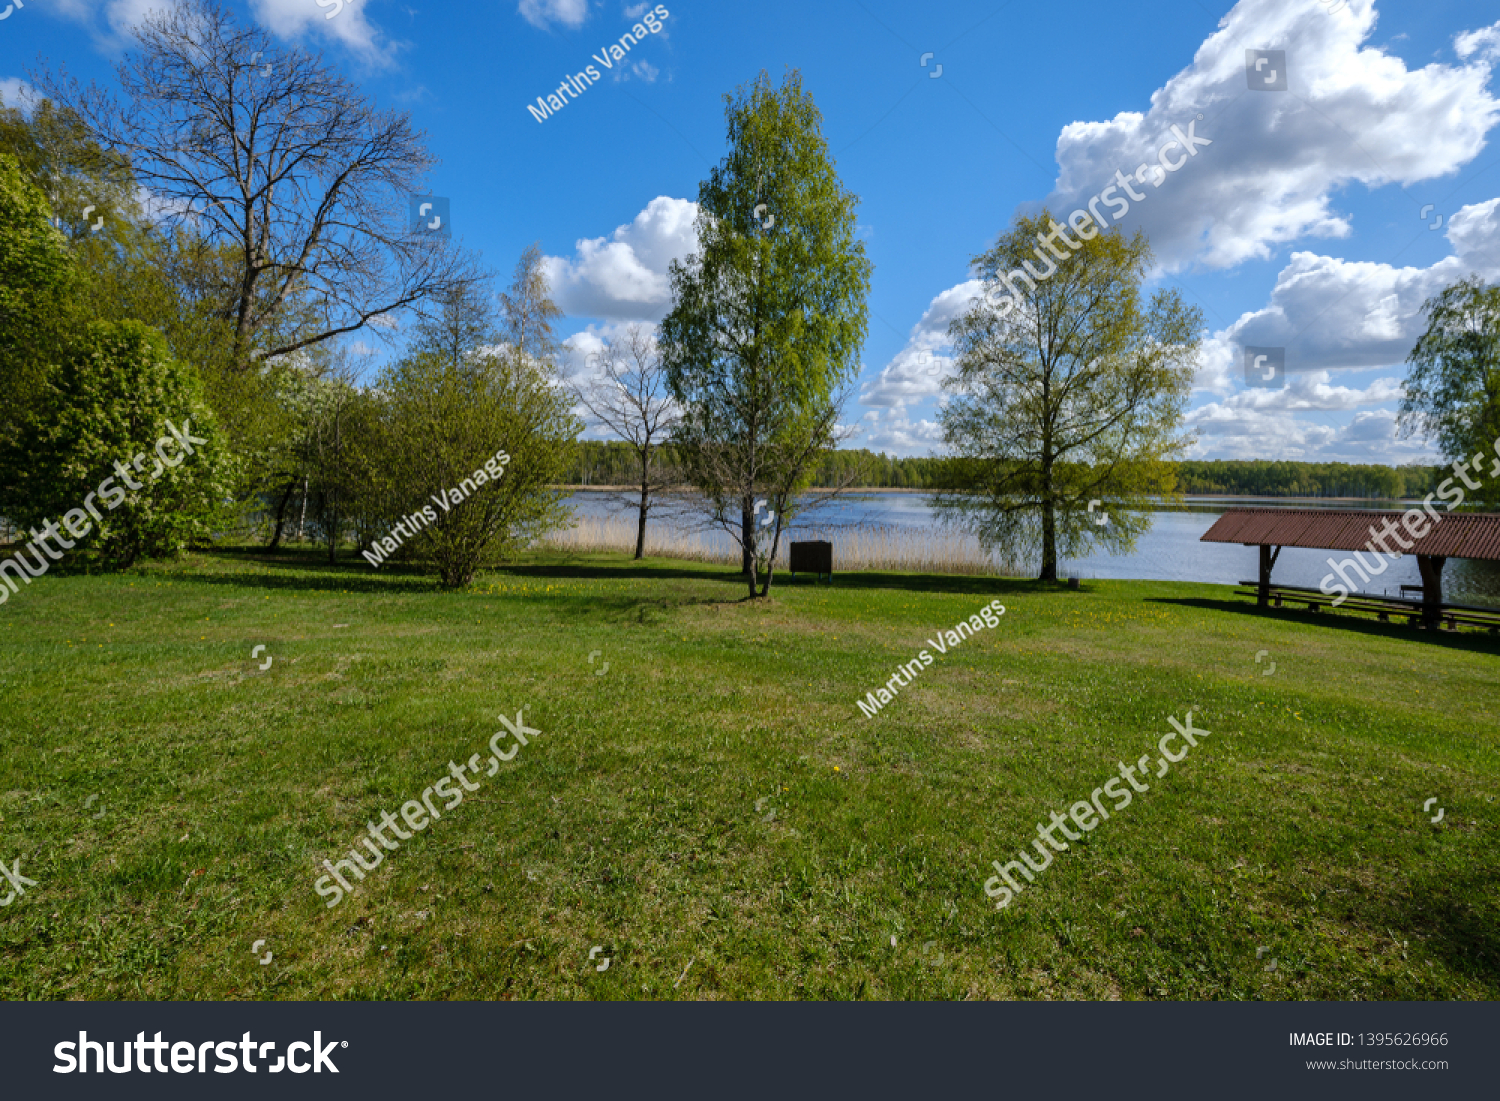 recreation camping area by the blue lake in sunny summer day on the shore of water body with trees, green meadow with dandelions and boats on the shore #1395626966